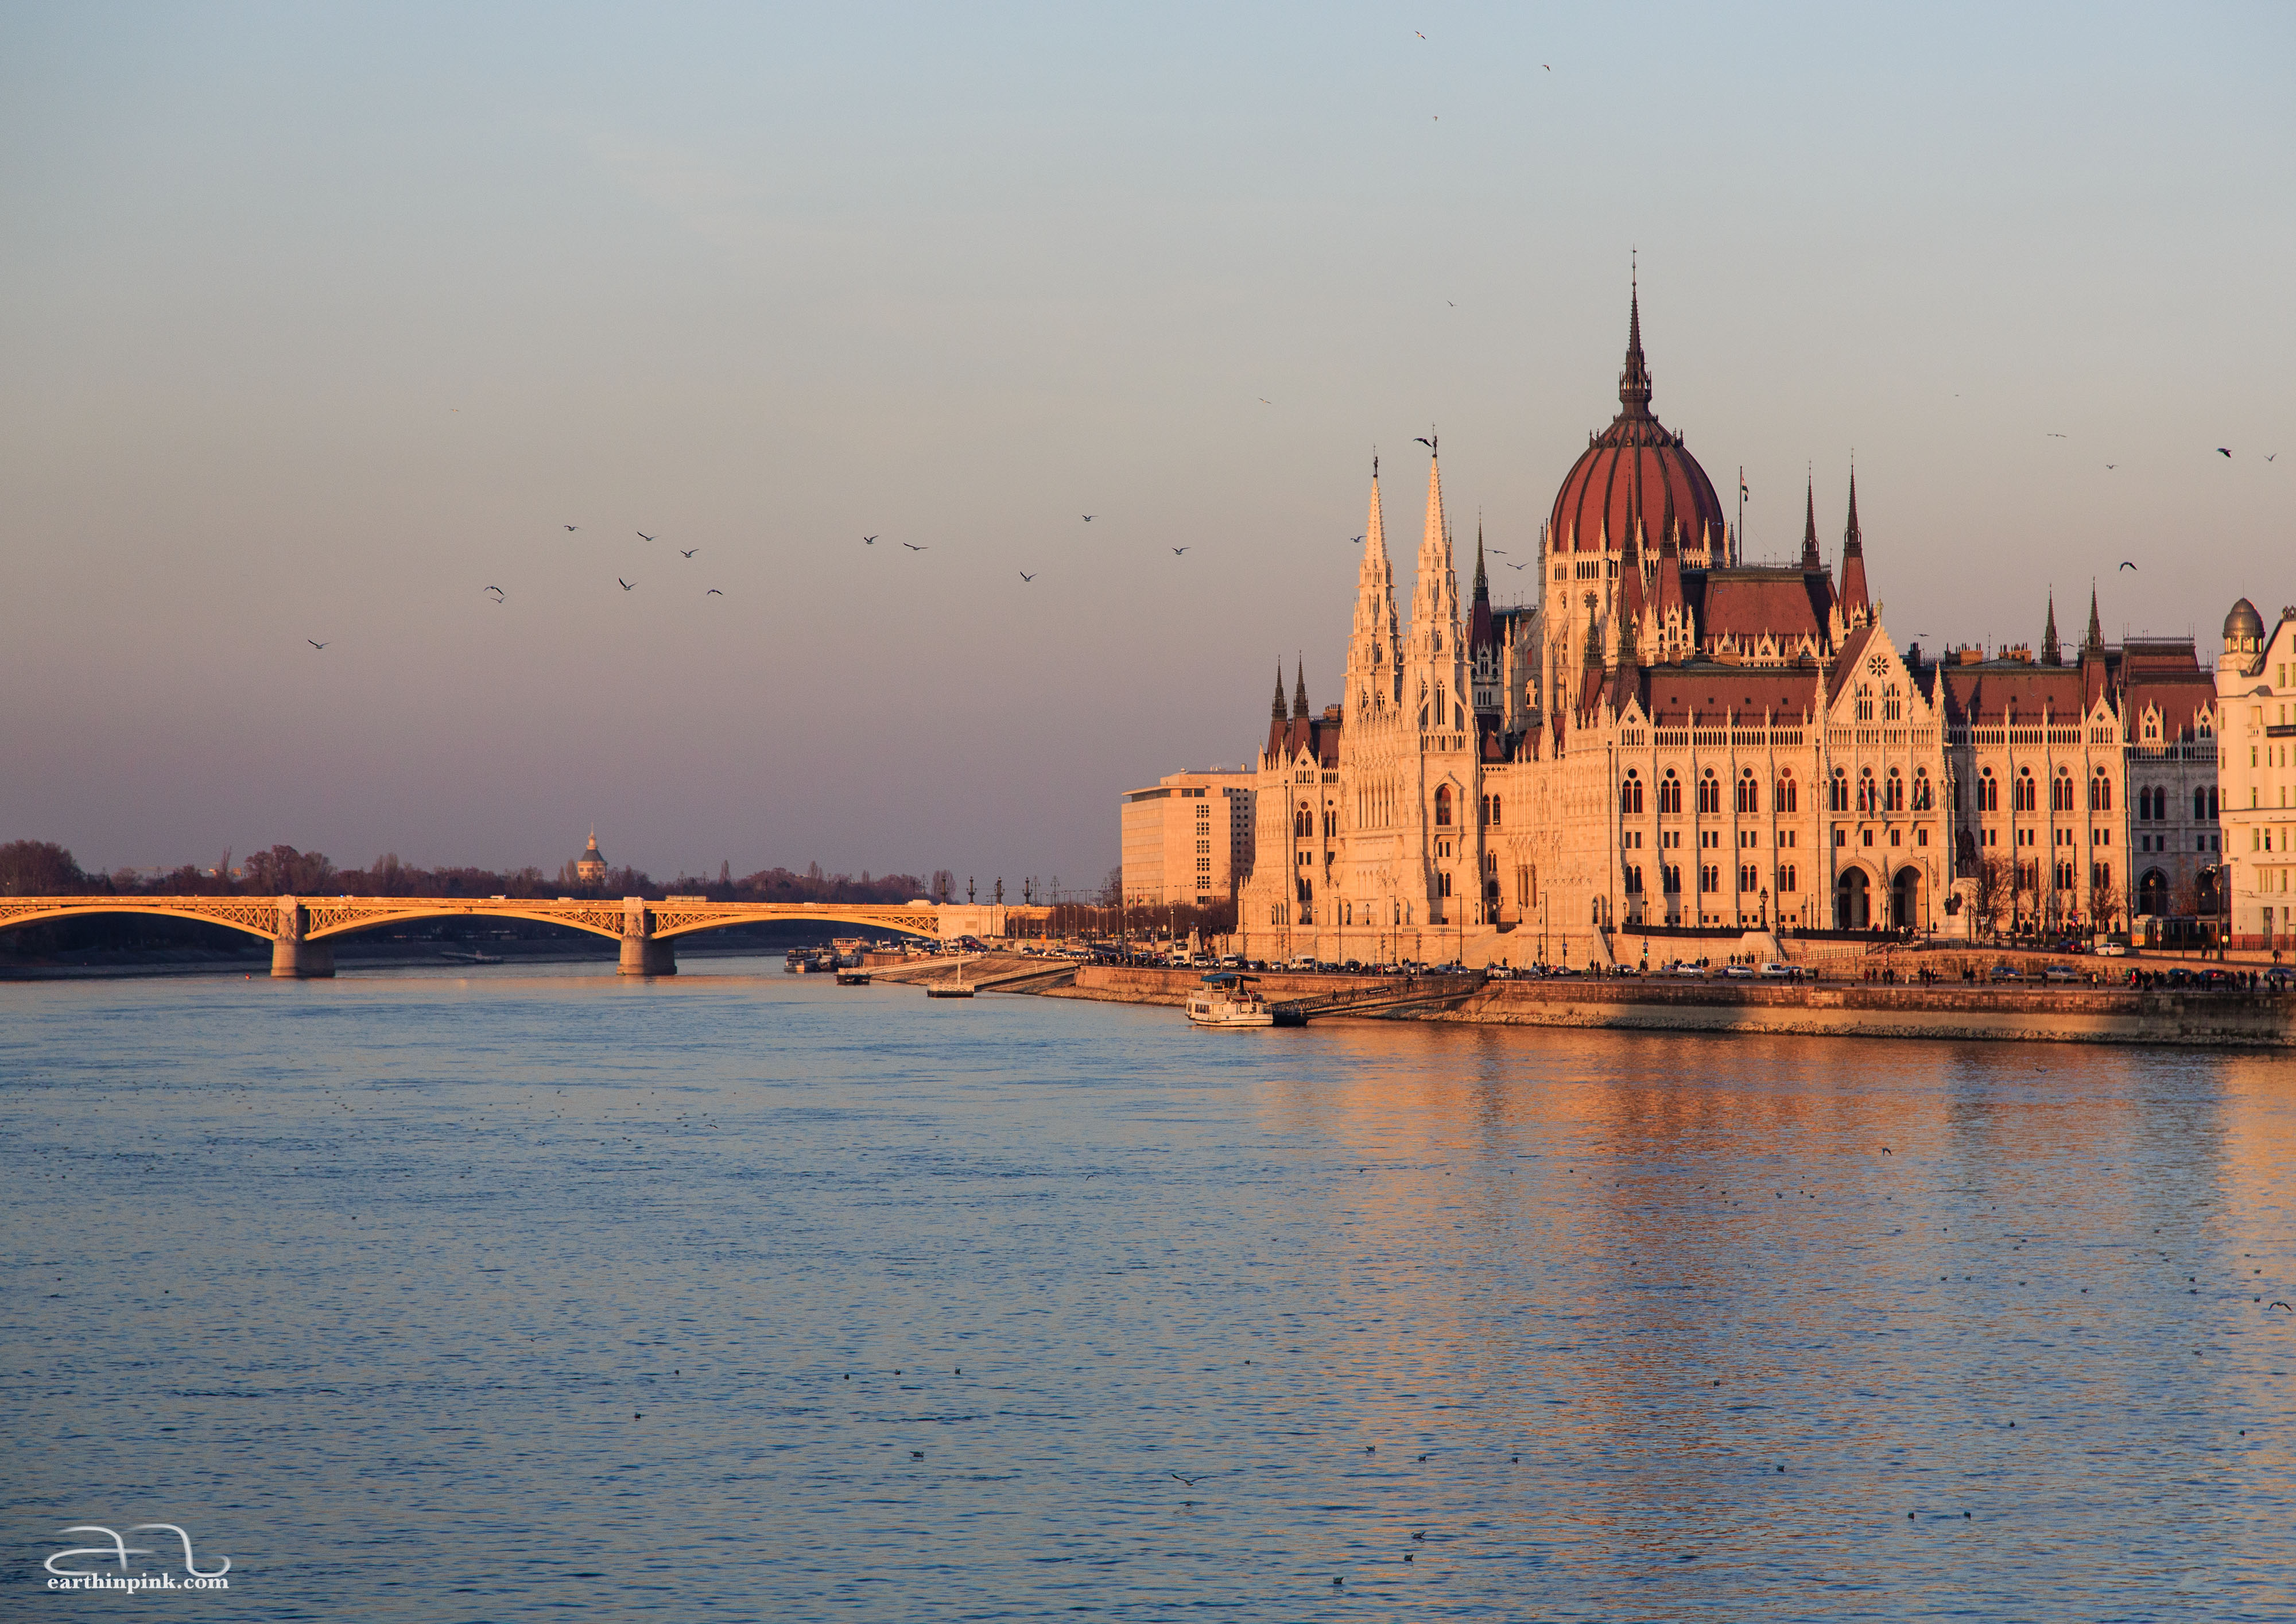 The Danube flowing in front of the Hungarian Parliament, Budapest